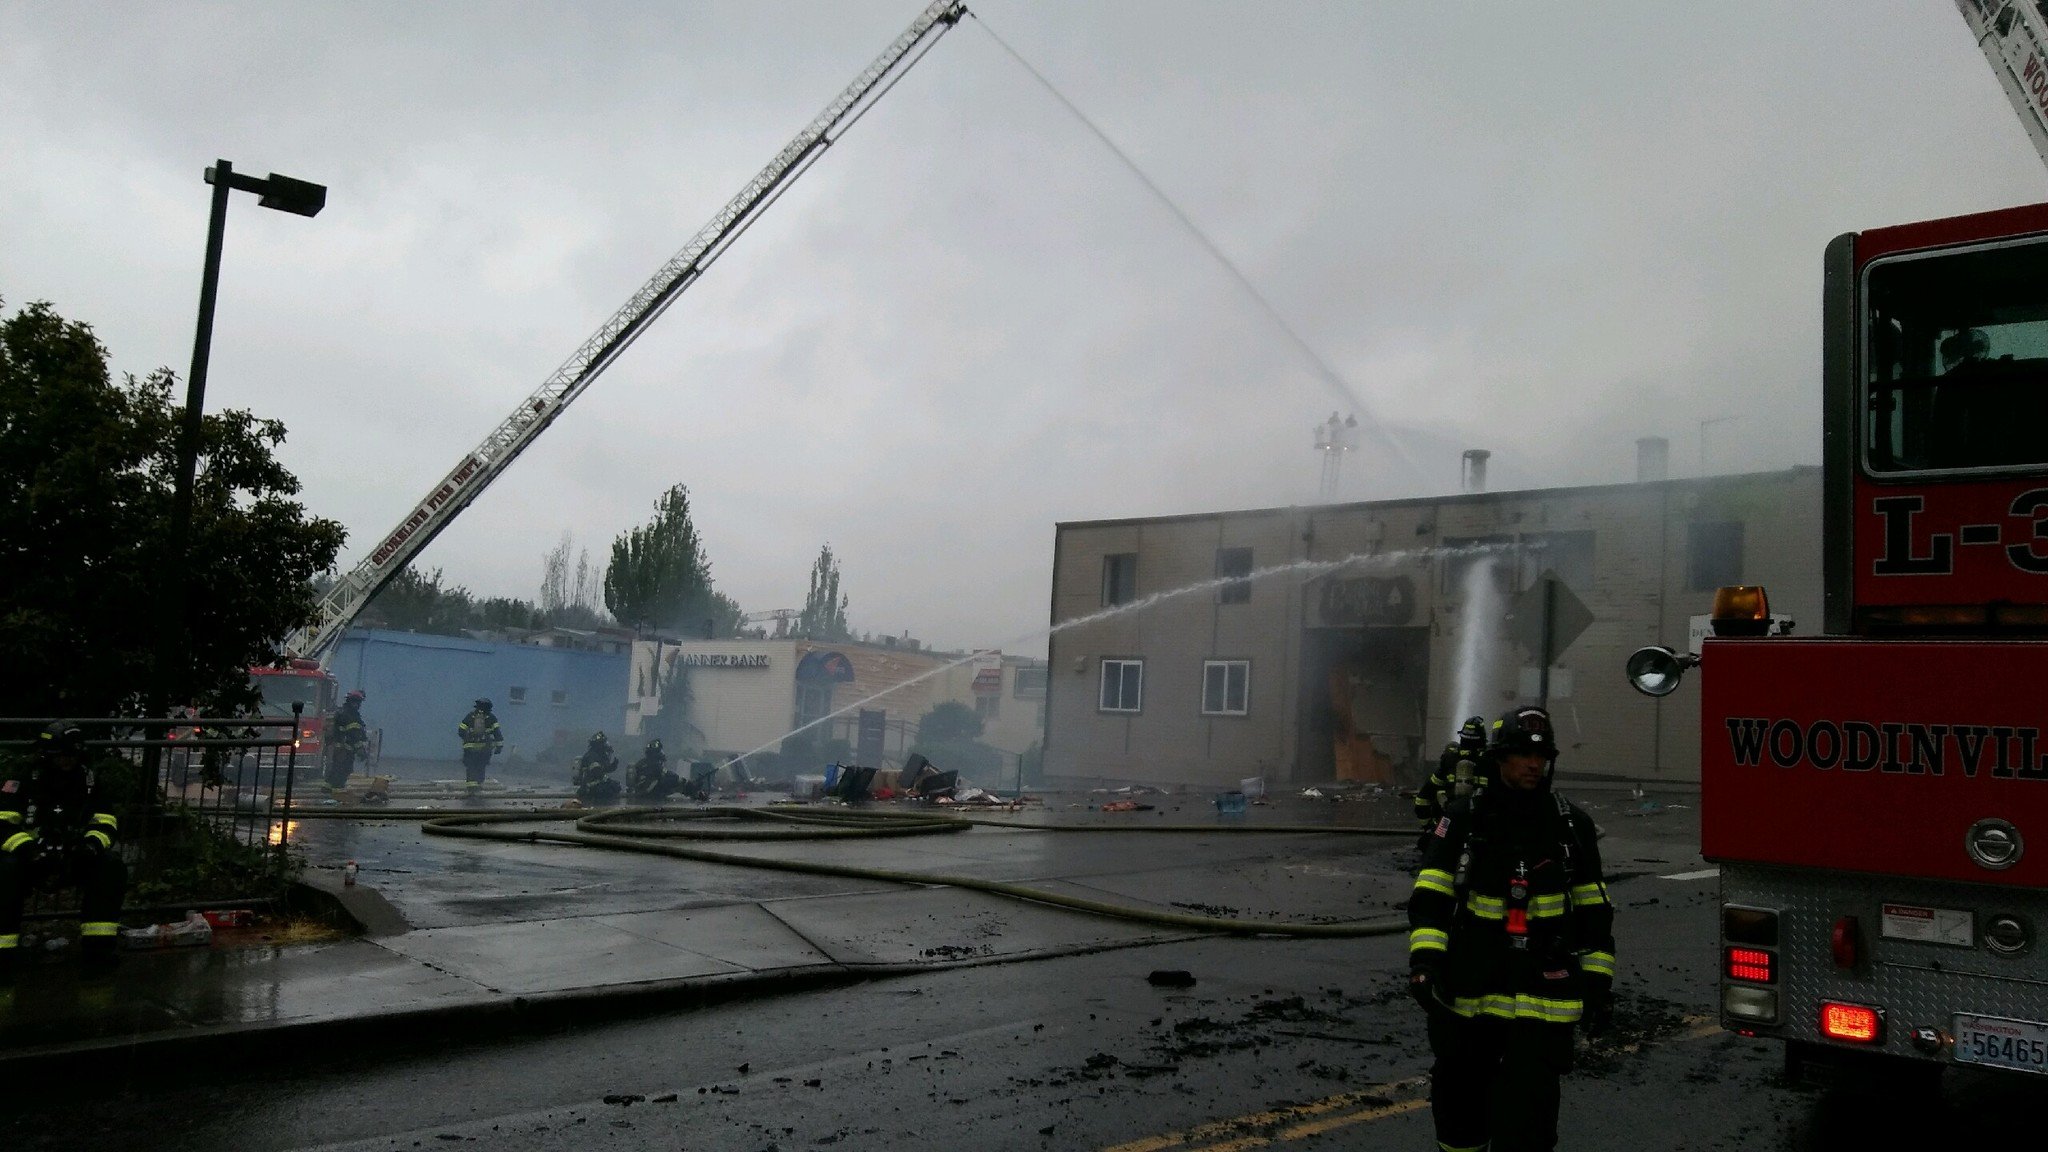 Firefighters douse a massive fire in downtown Bothell this morning. Aaron Kunkler